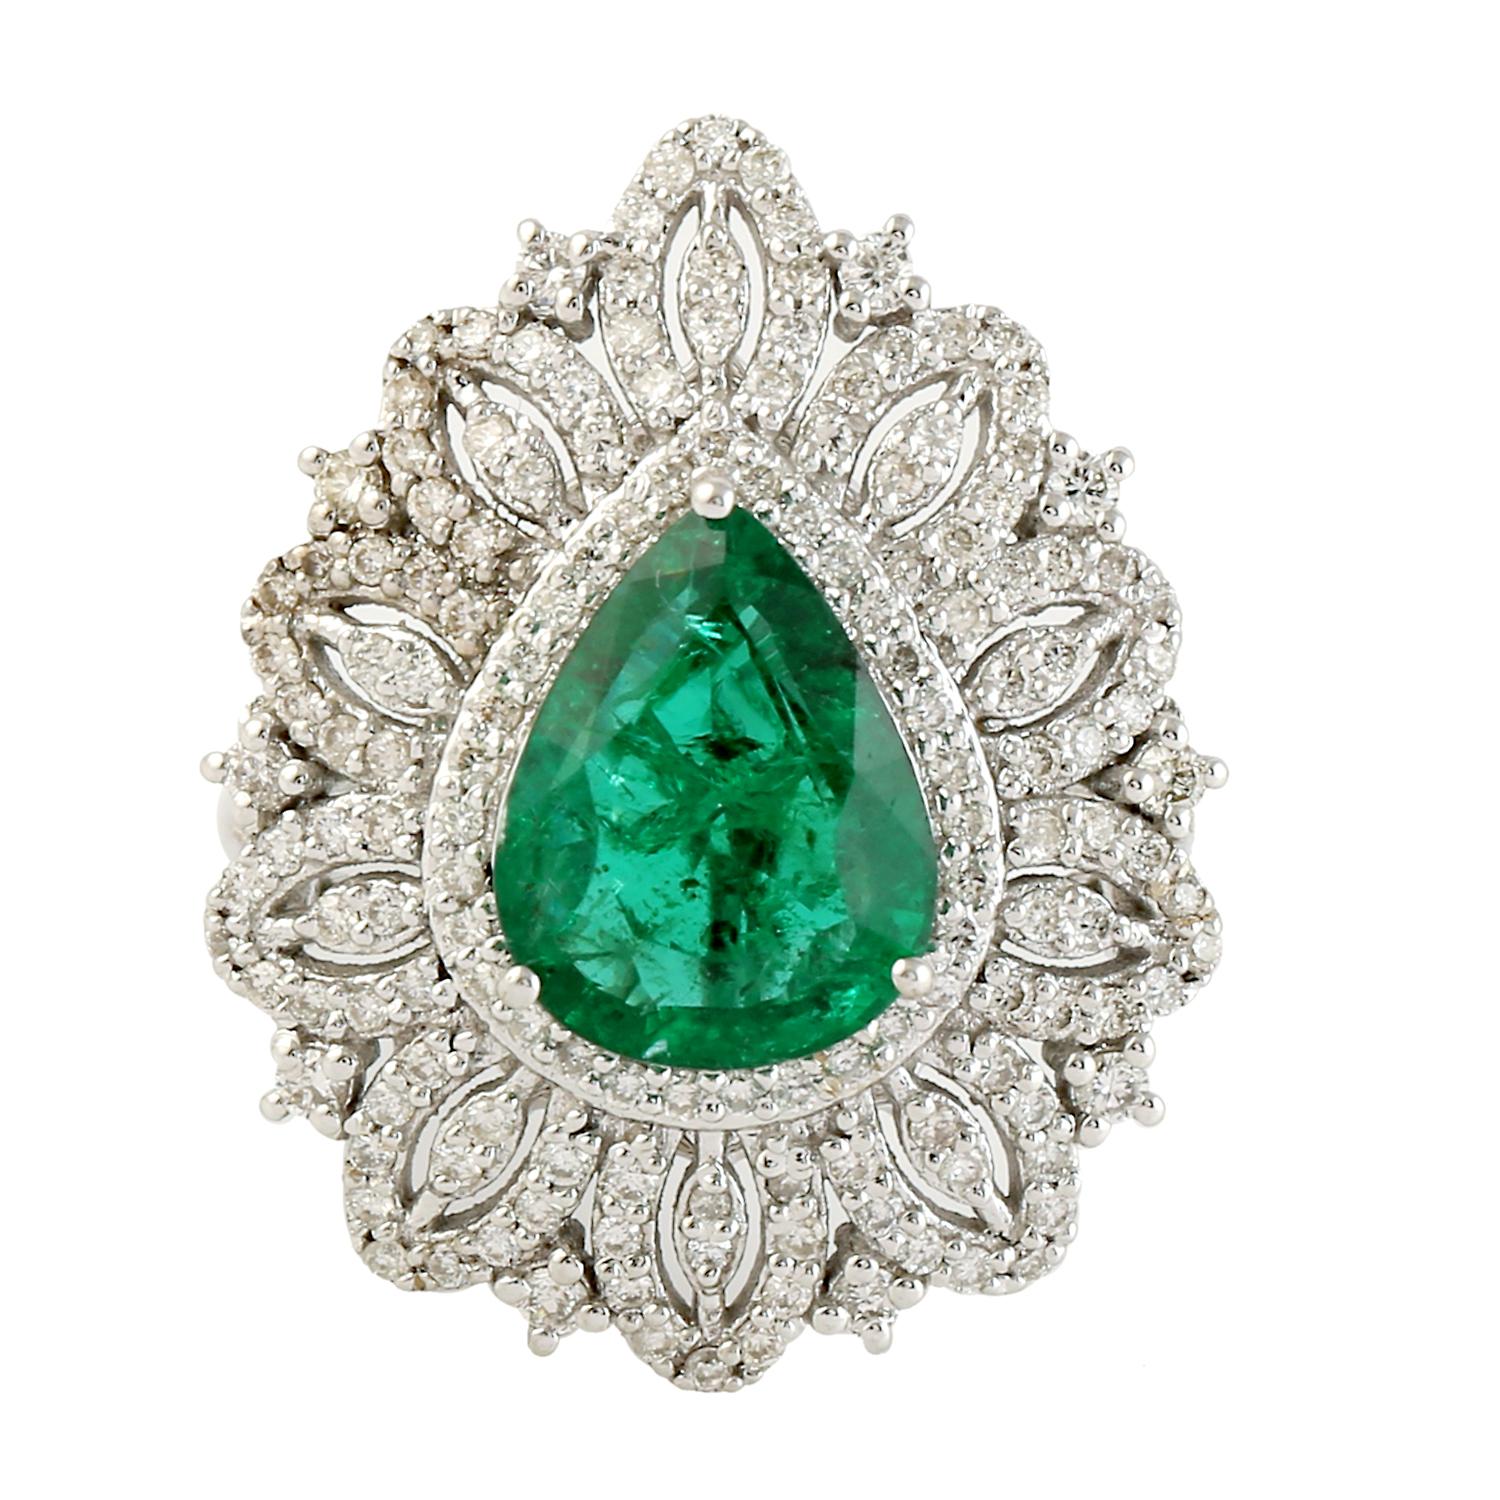 Mixed Cut 2.98 ct Pear Shaped Zambian Emerald Ring With Diamonds Made in 18k White Gold For Sale